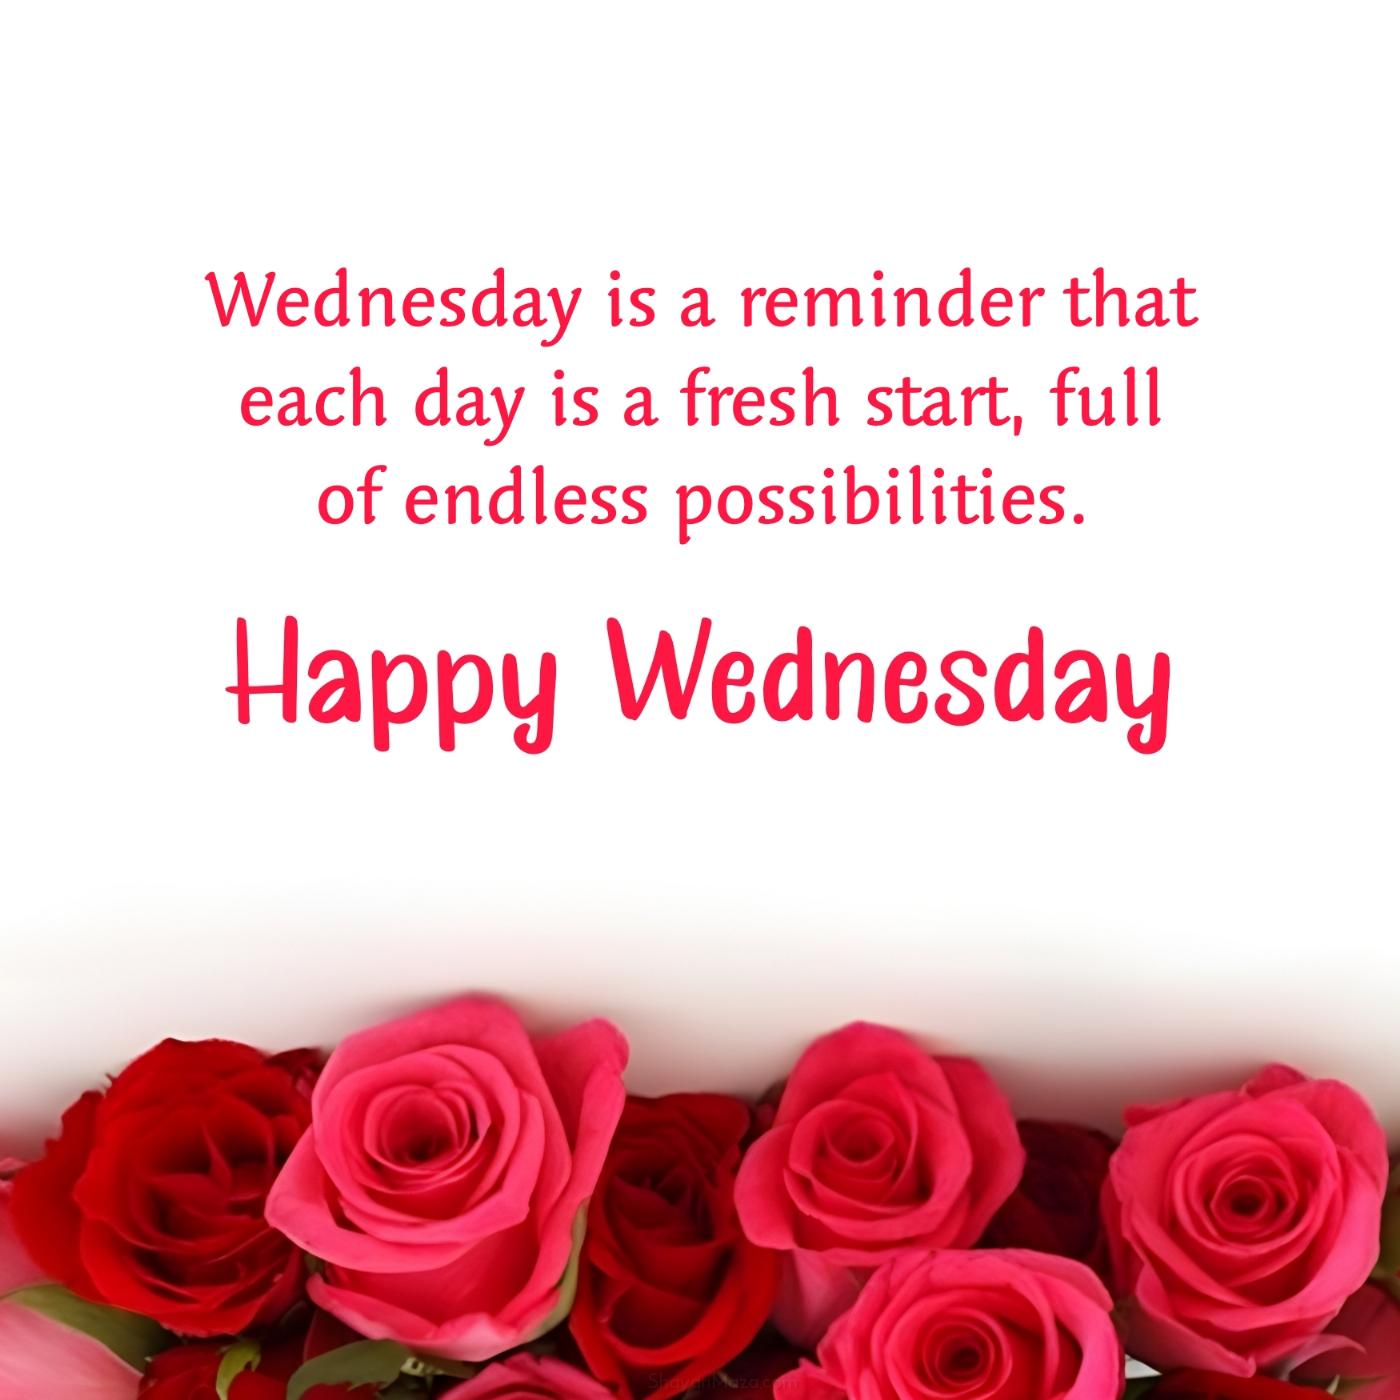 Wednesday is a reminder that each day is a fresh start